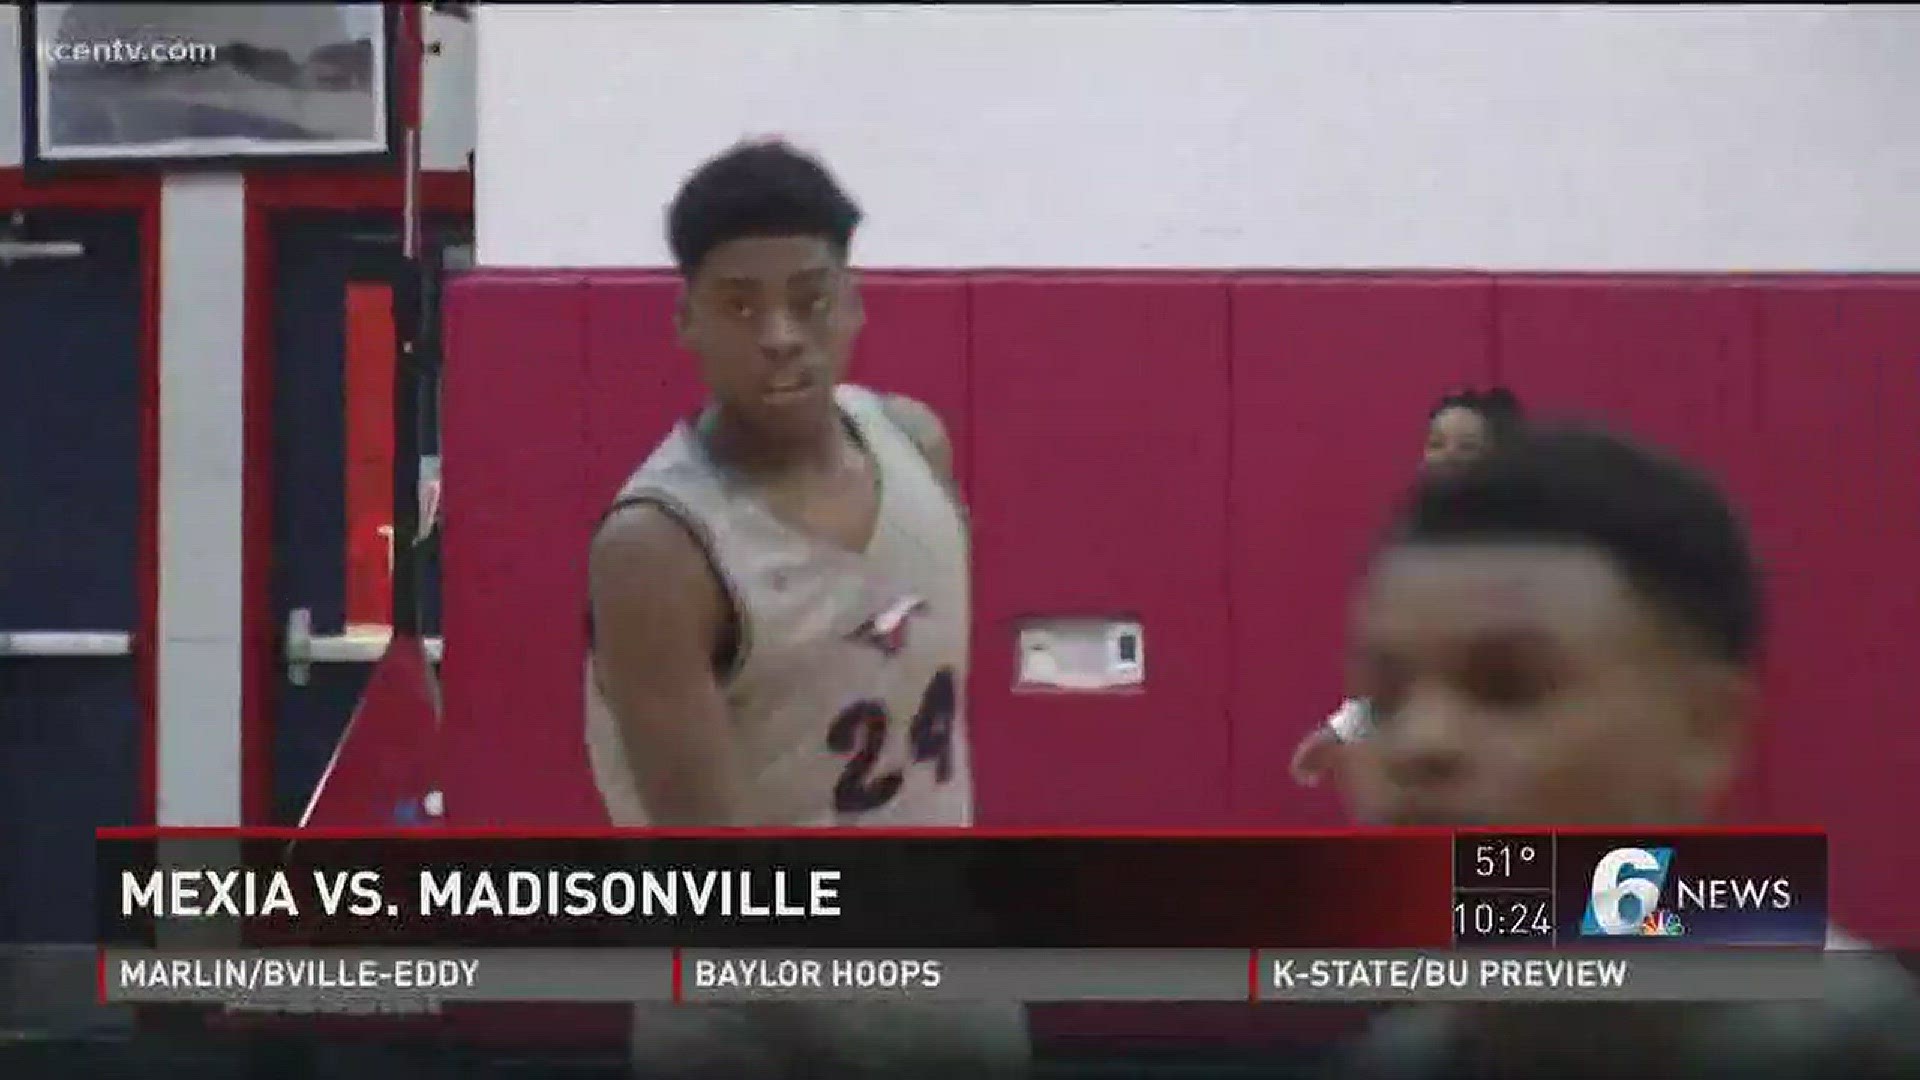 Mexia vs. Madisonville highlights.